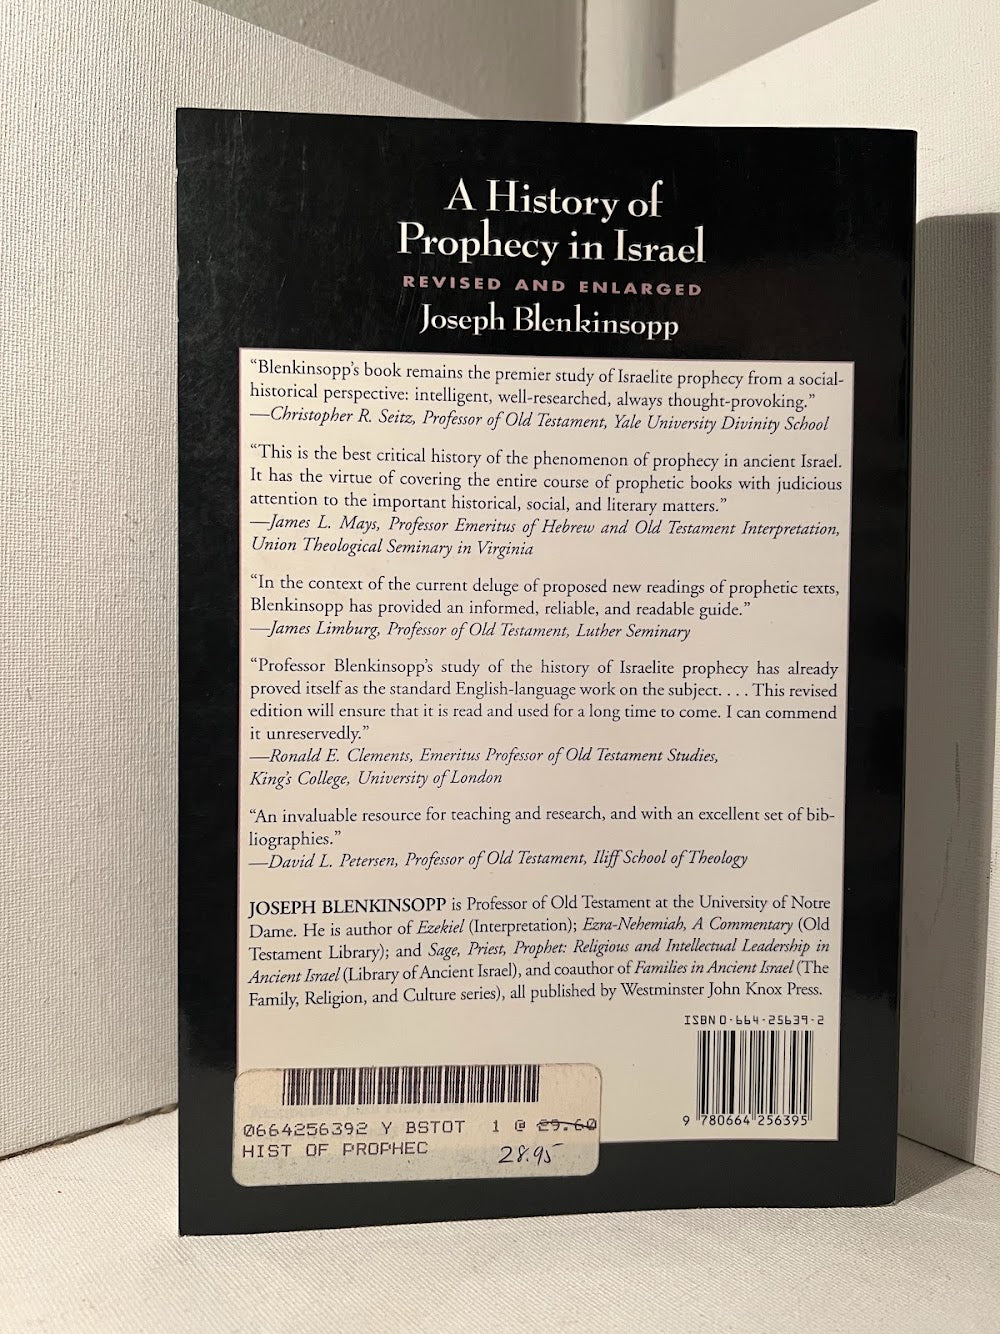 A History of Prophecy in Israel by Joseph Blenkinsopp